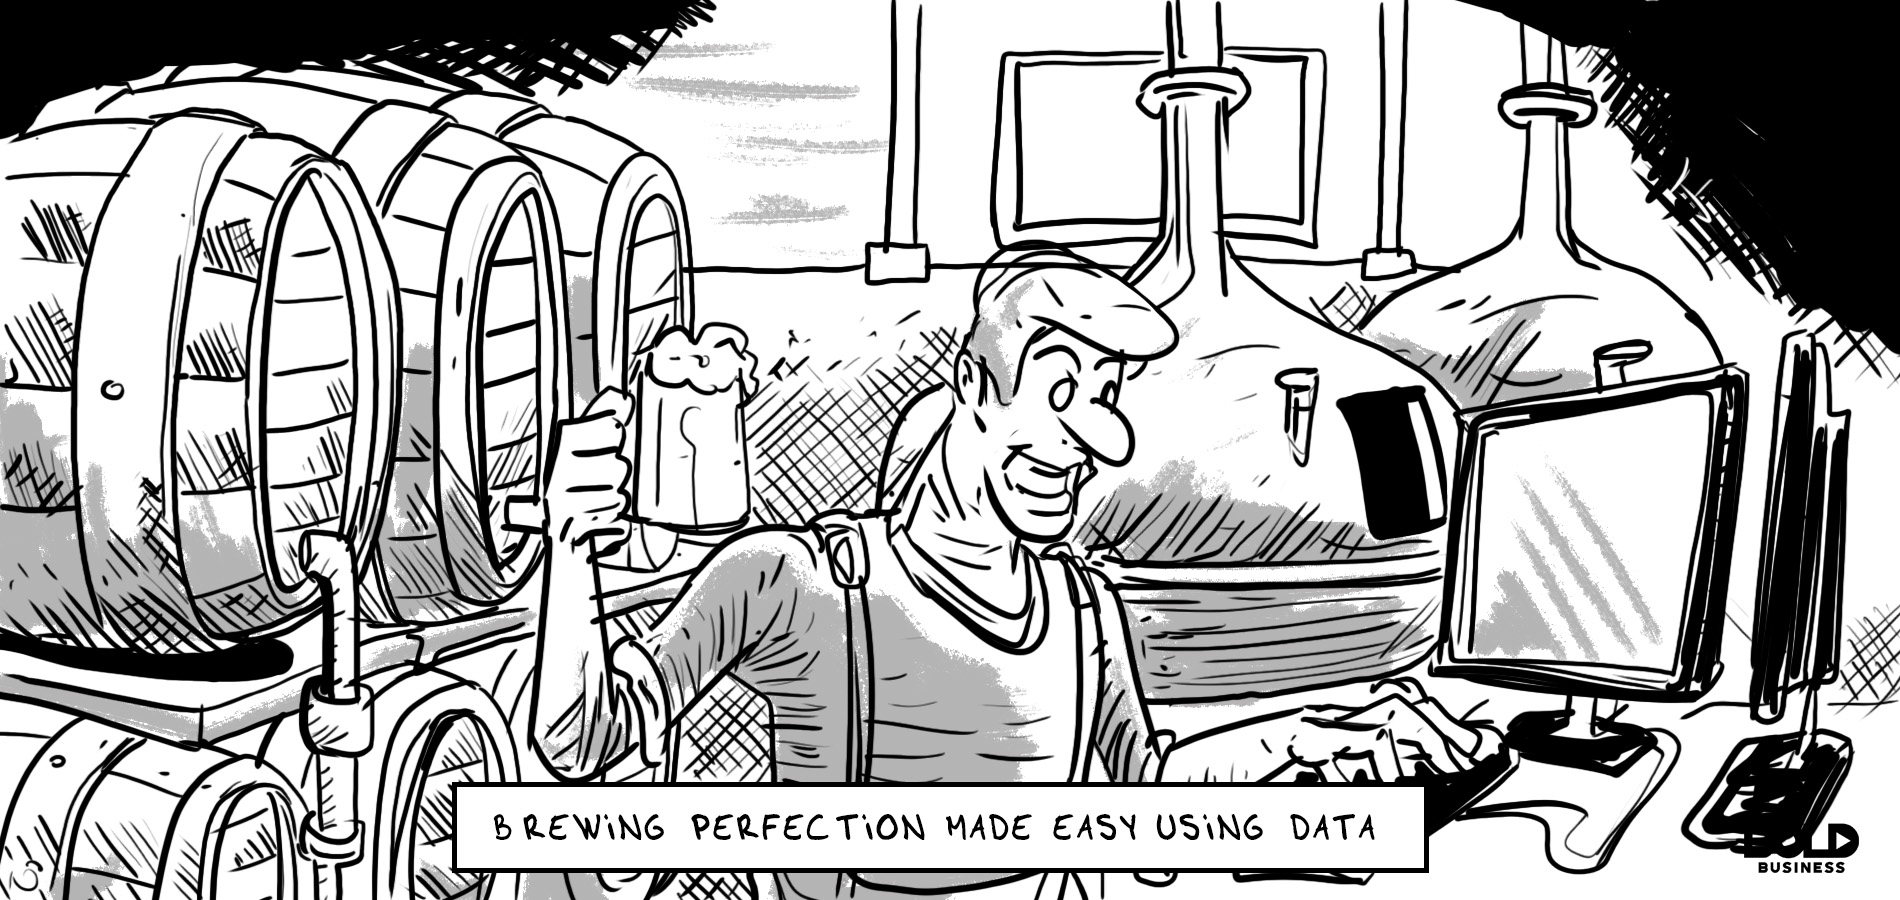 brewing perfection made easy using data, a brewer improving beer using data in a lab